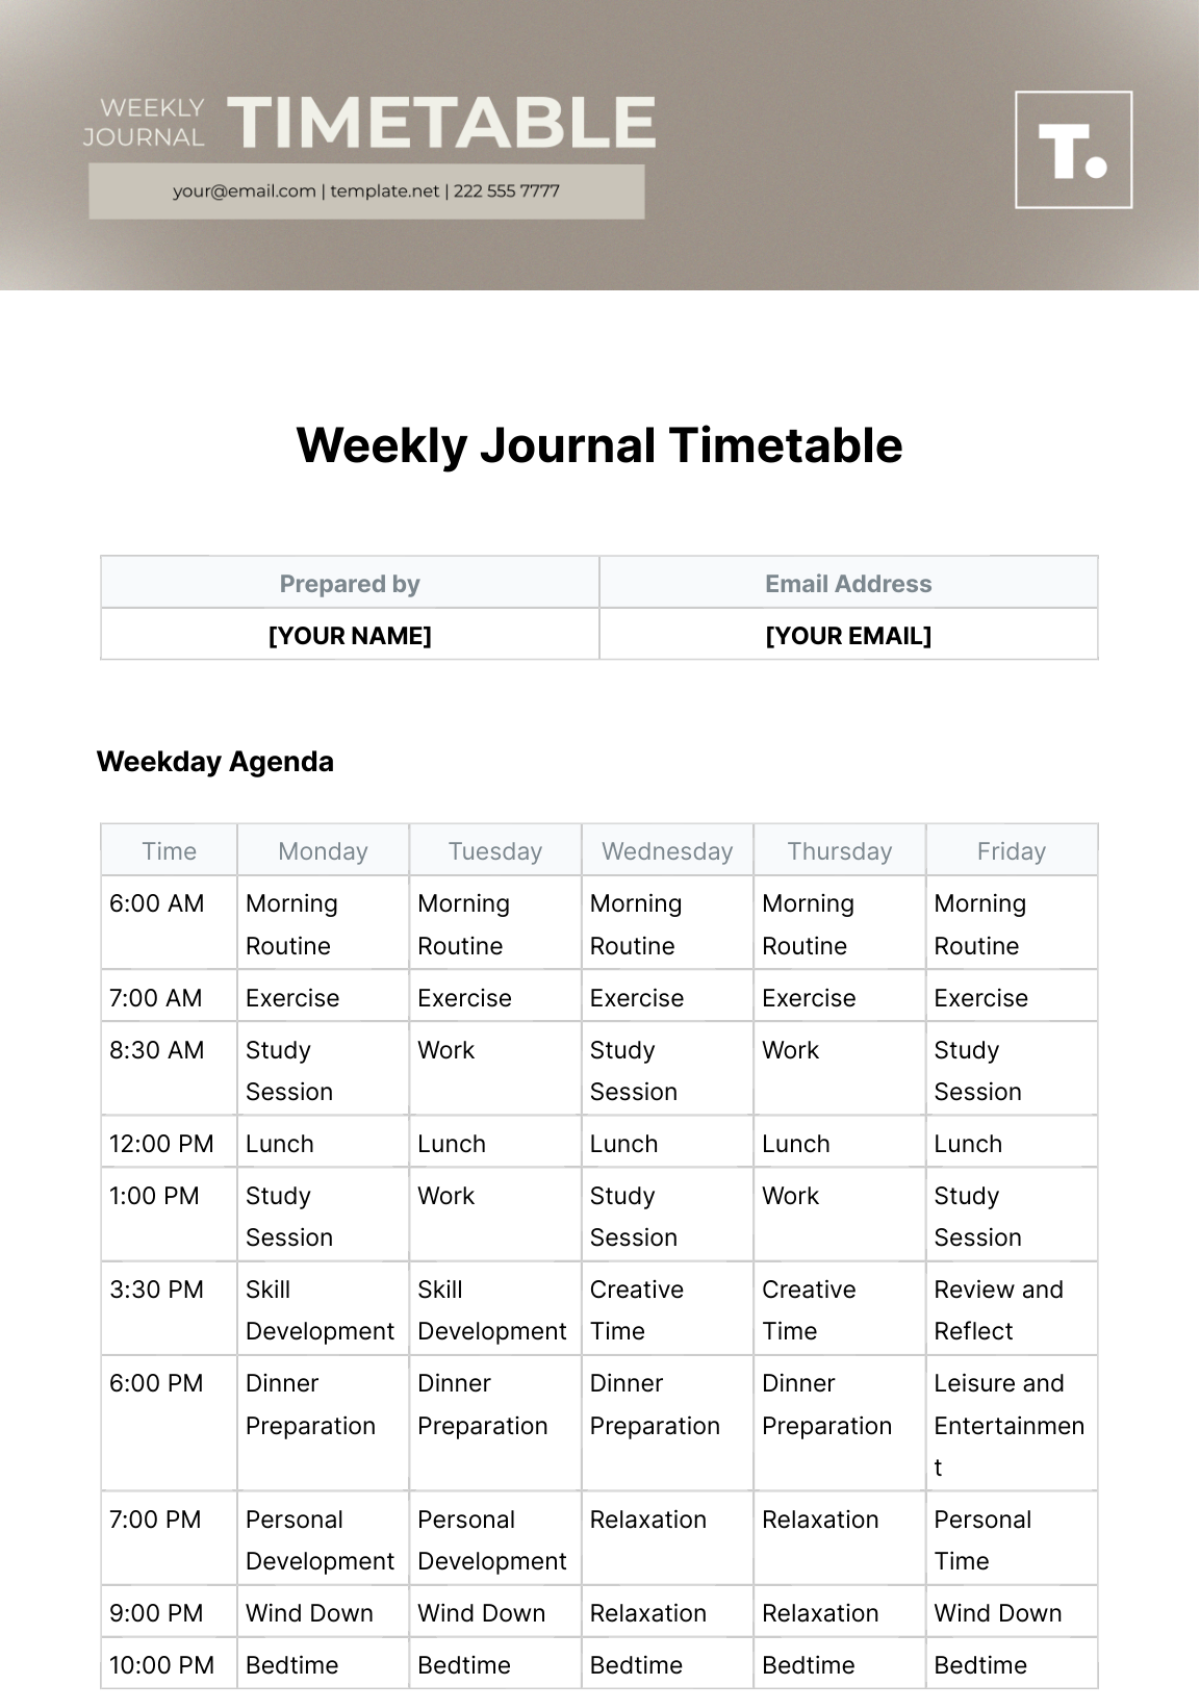 Weekly Journal Timetable Template